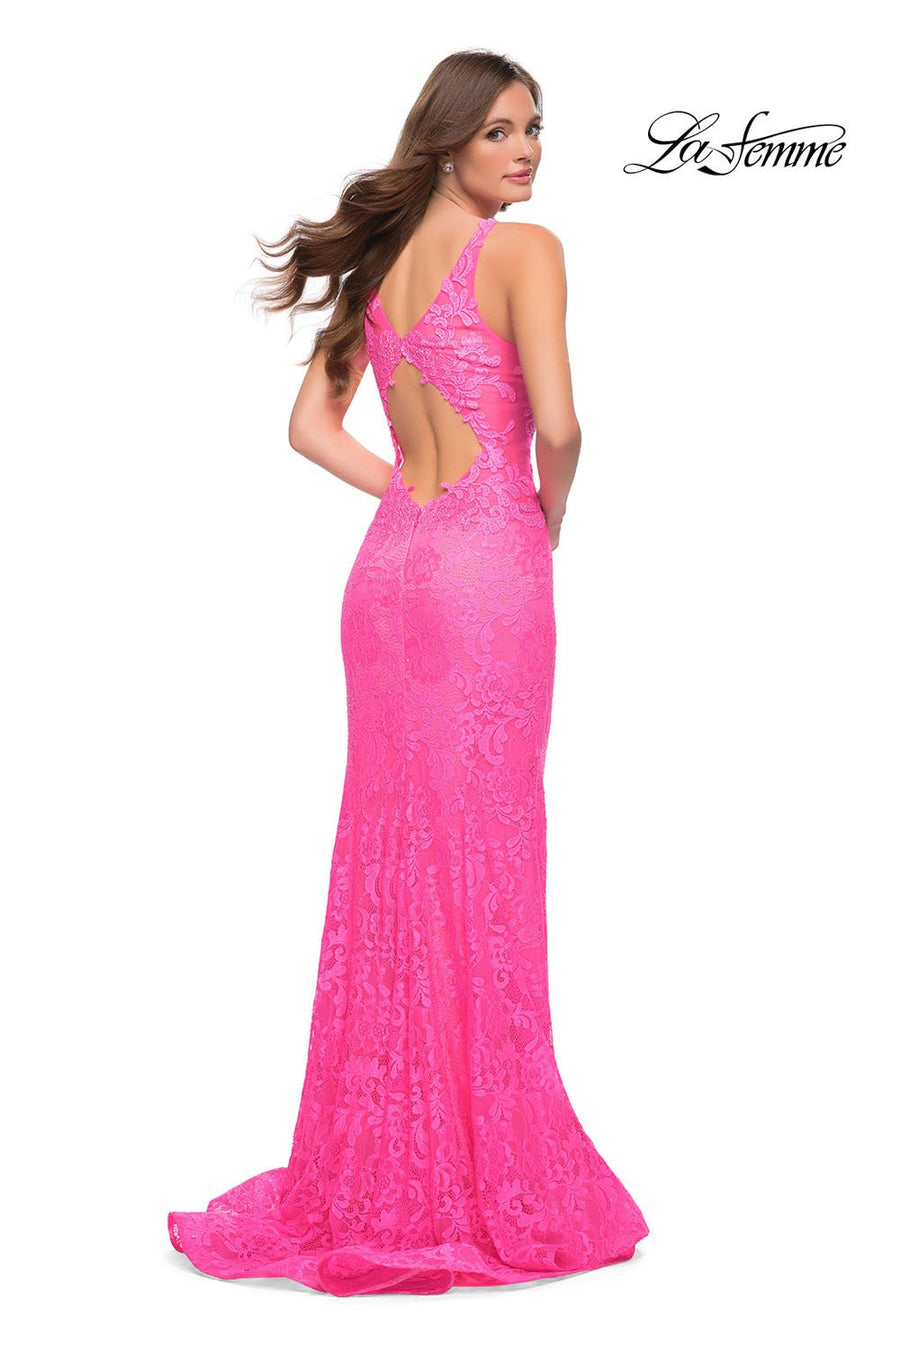 La Femme 29978 prom dress images.  La Femme 29978 is available in these colors: Neon Pink.